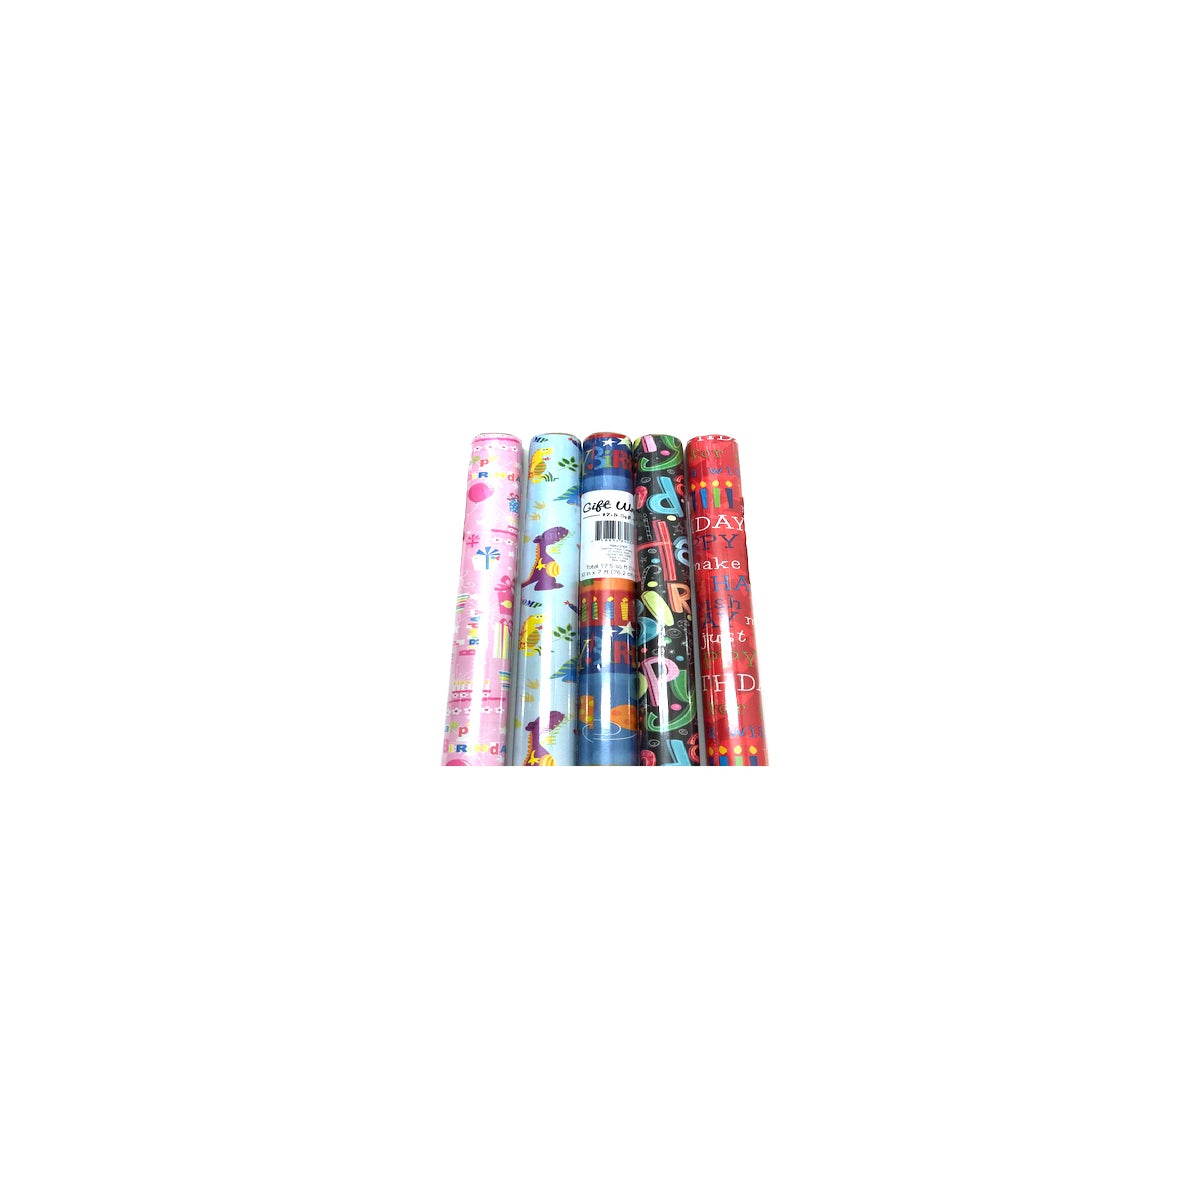 WRAPPING PAPER: BIRTHDAY, 17.5 SQ FT., 30x7 FT. #38257 (PK 48